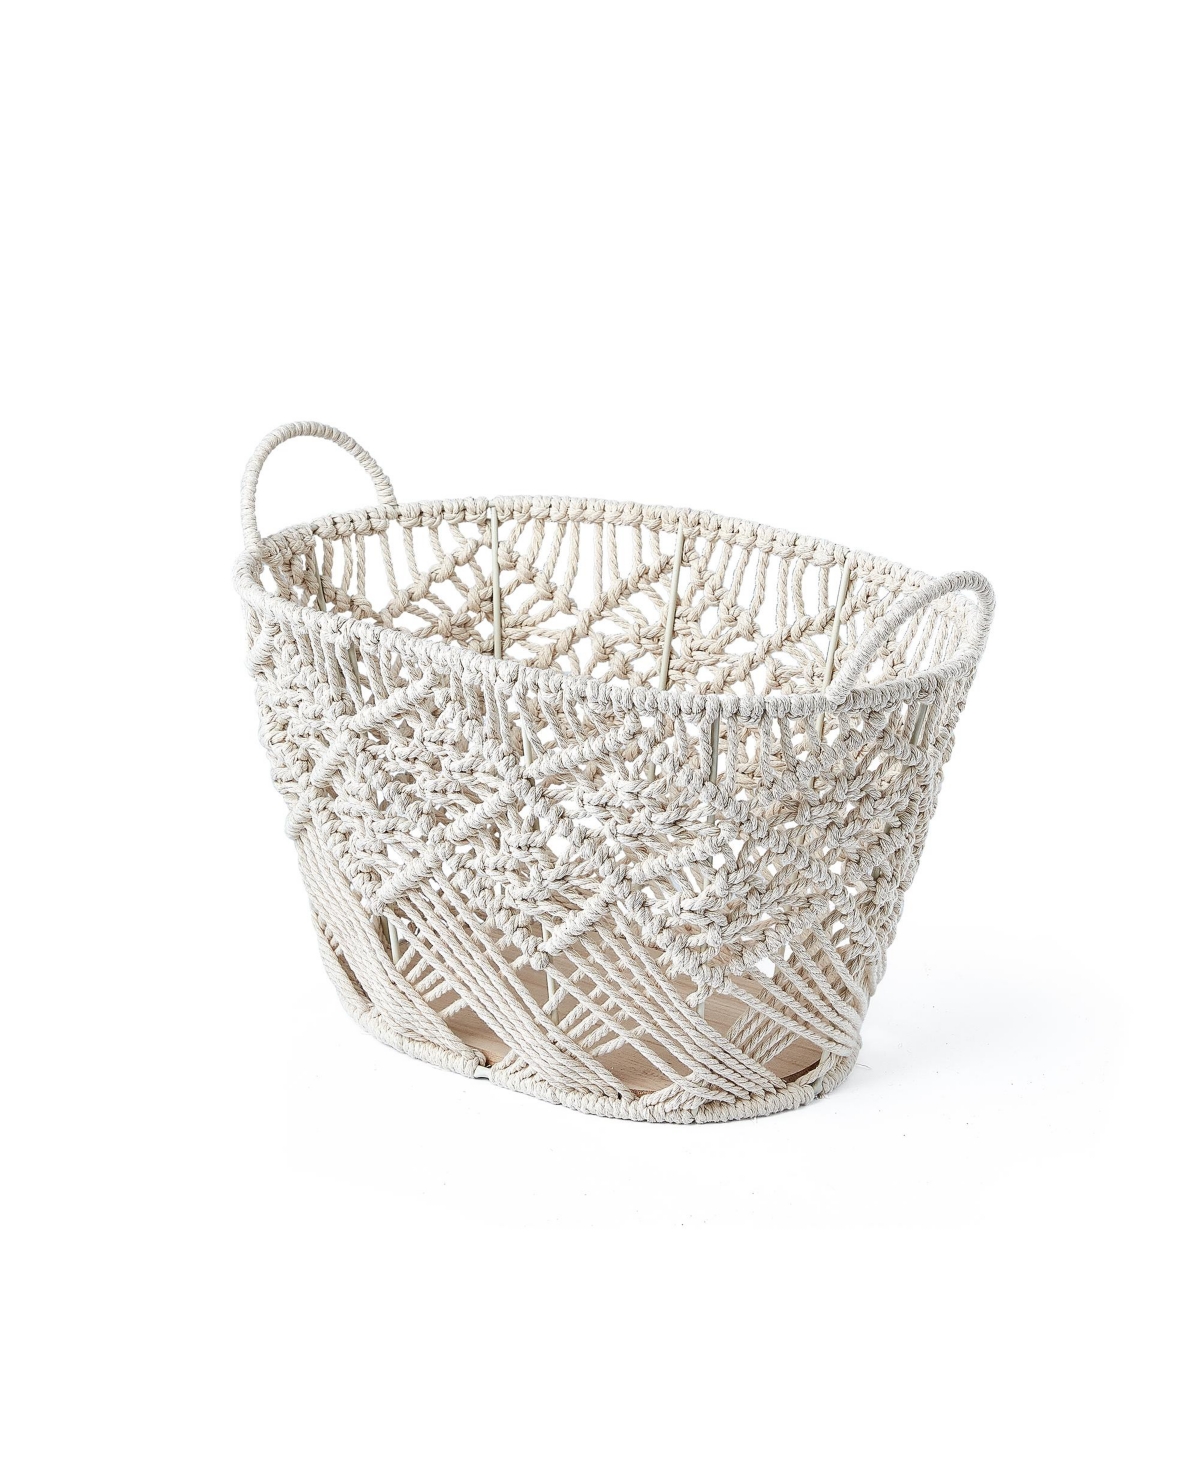 Baum Macrame Oval Cotton Rope Storage Bins With Ear Handles And Wood Base, Set Of 3 In White